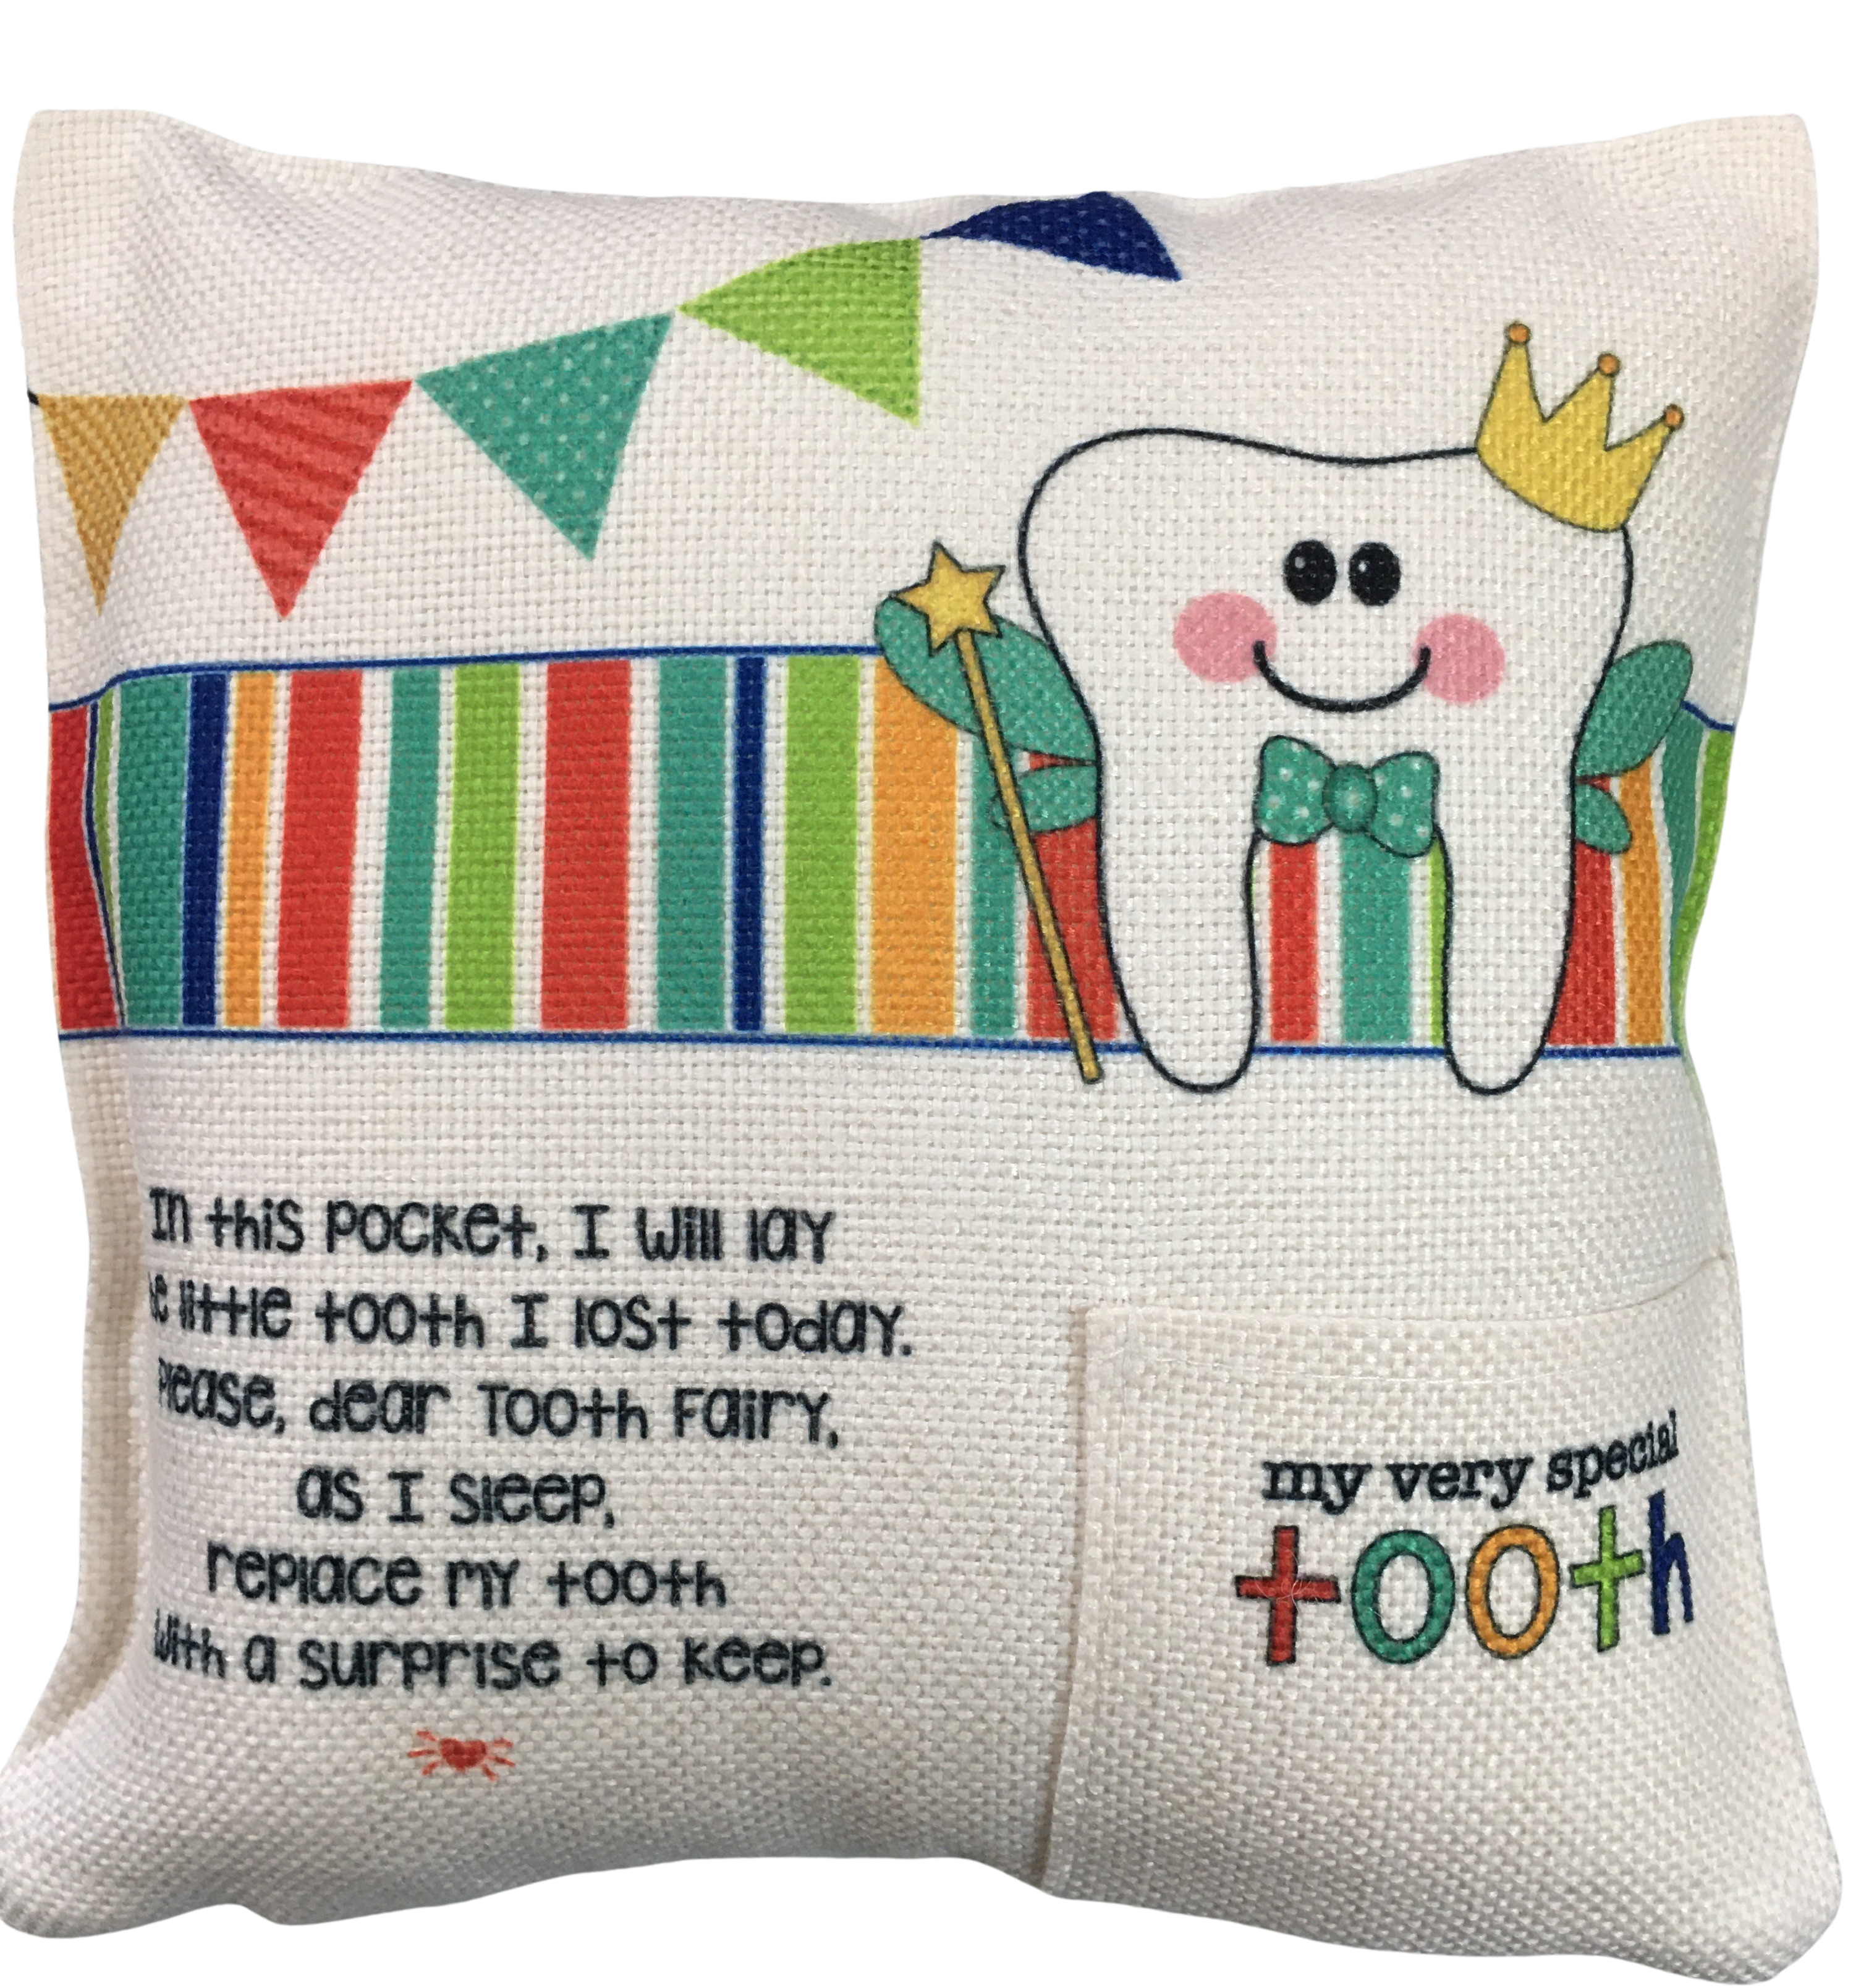 My Tooth Fairy Details about   C&F Home 6" x 6" Saying Pillow w/Pocket 